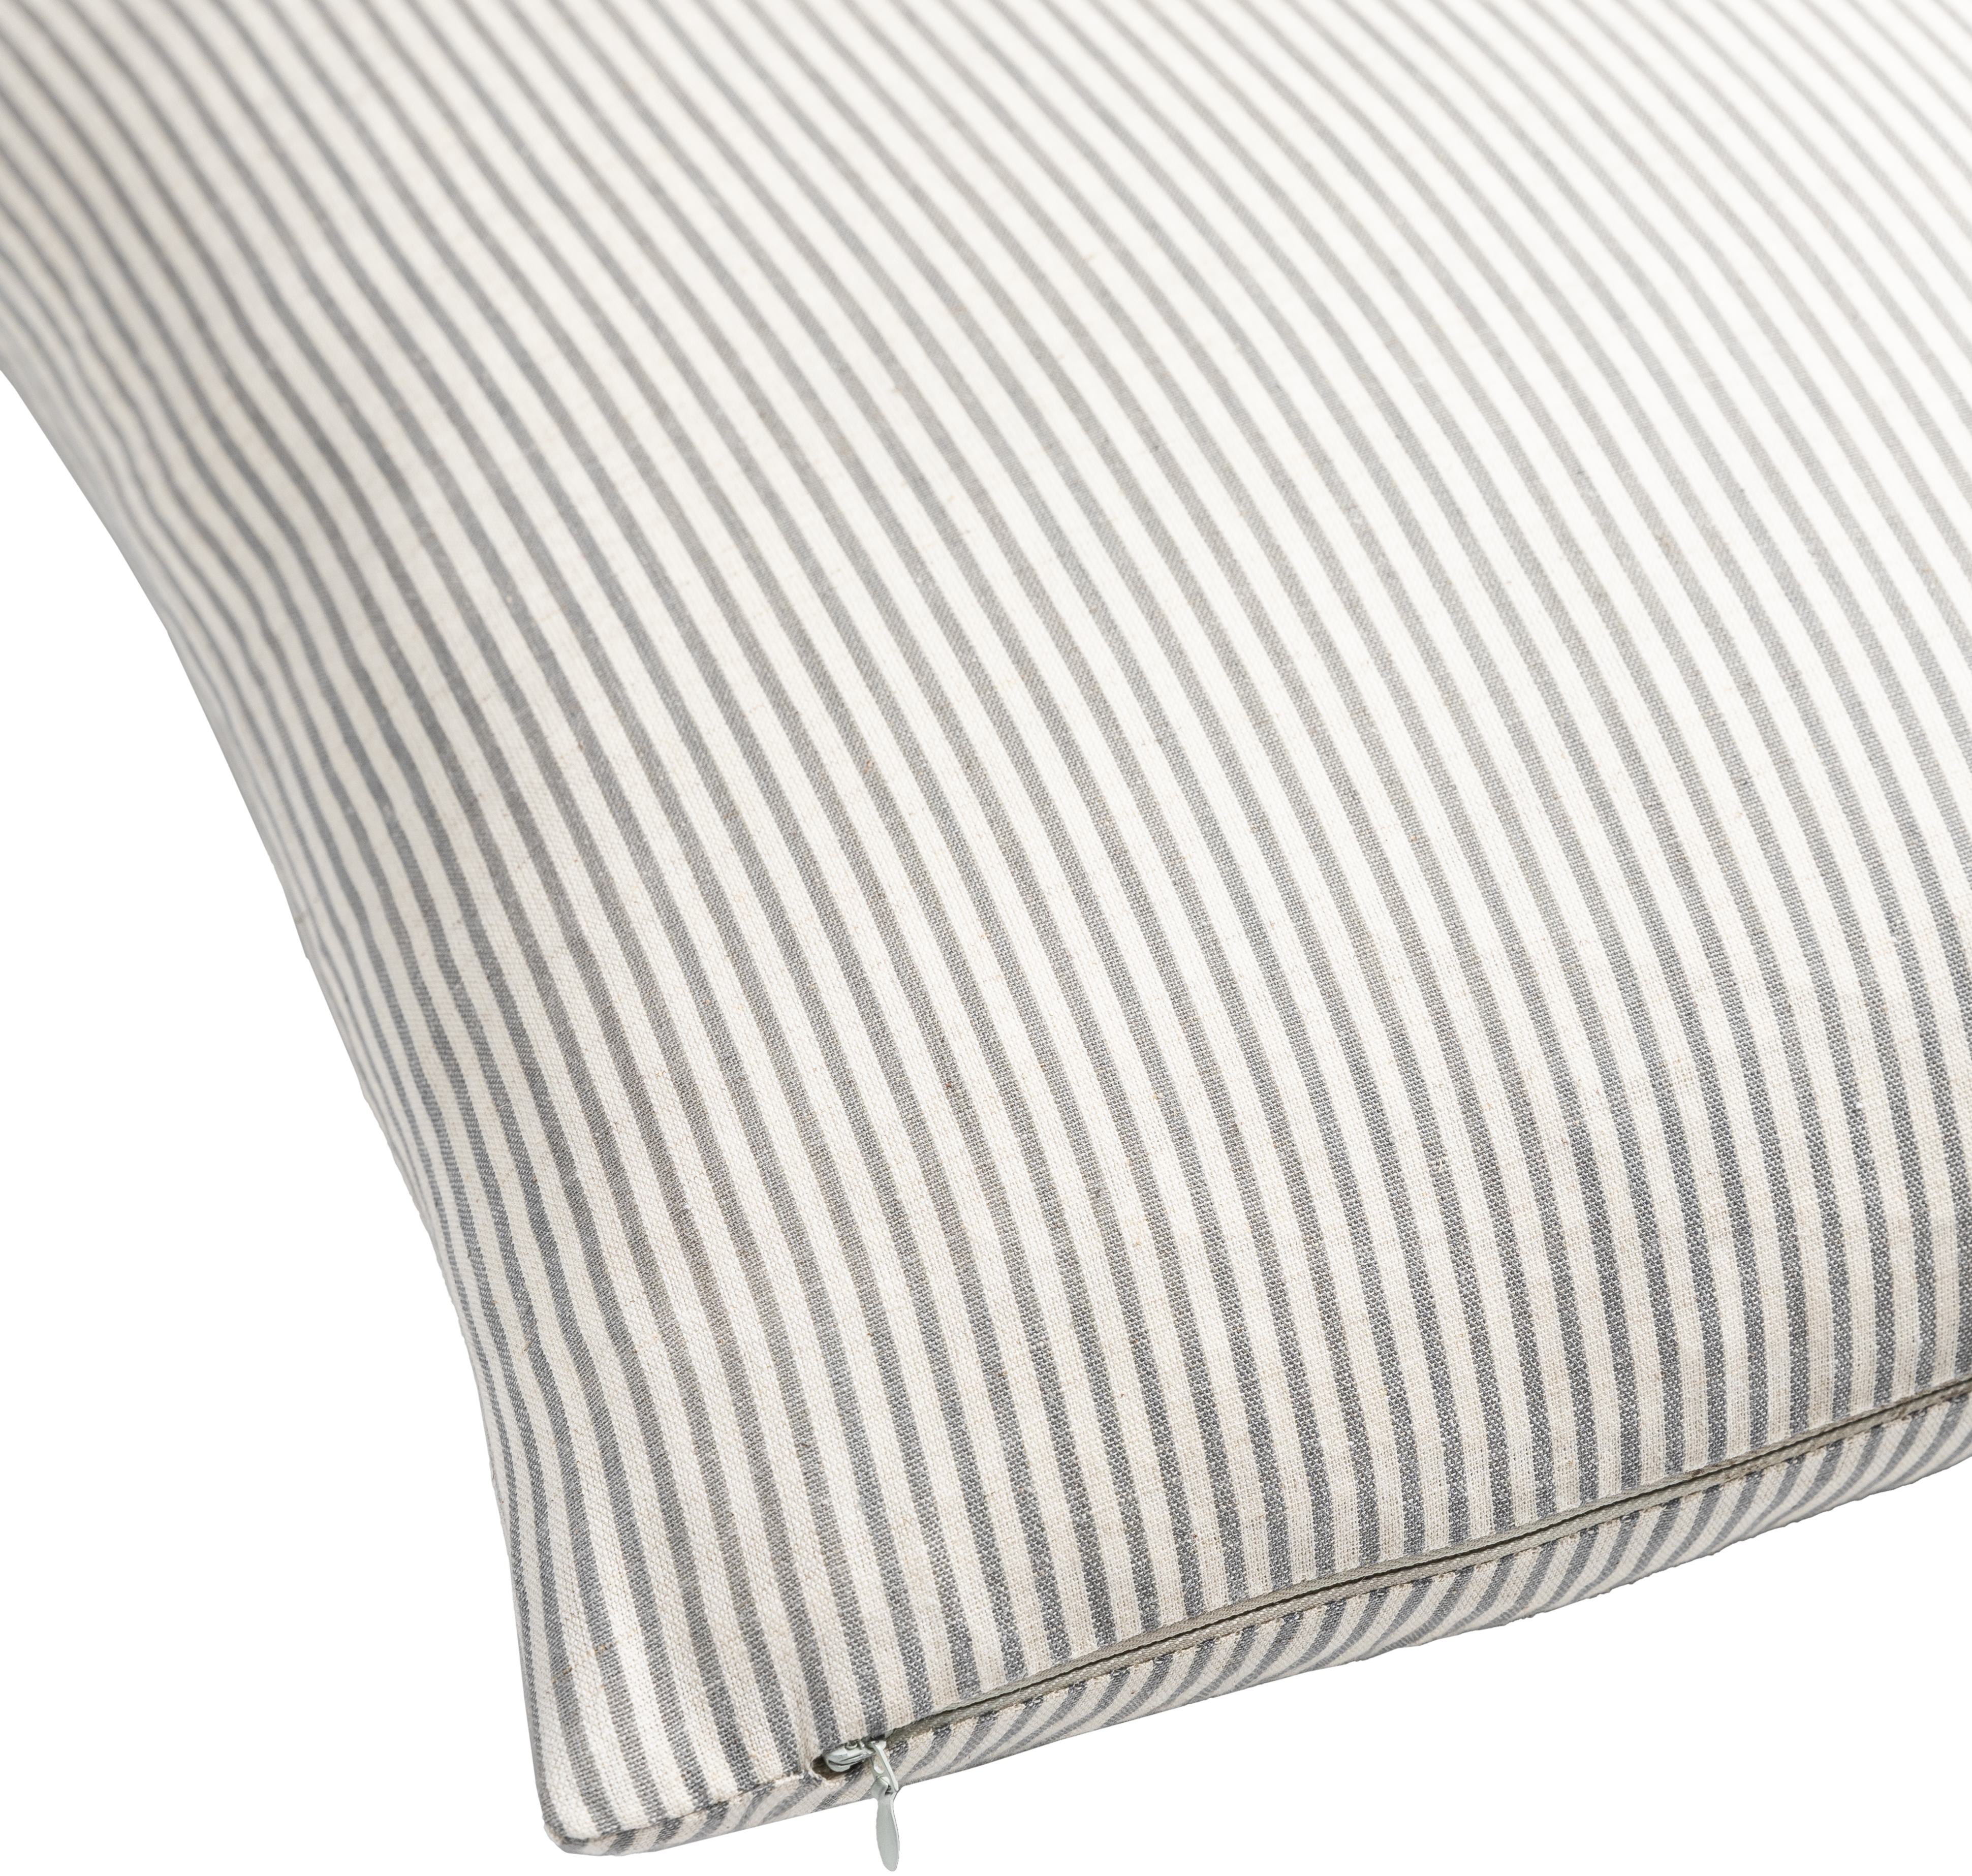 Skinny Stripe Throw Pillow, 20" x 20", with down insert - Image 1